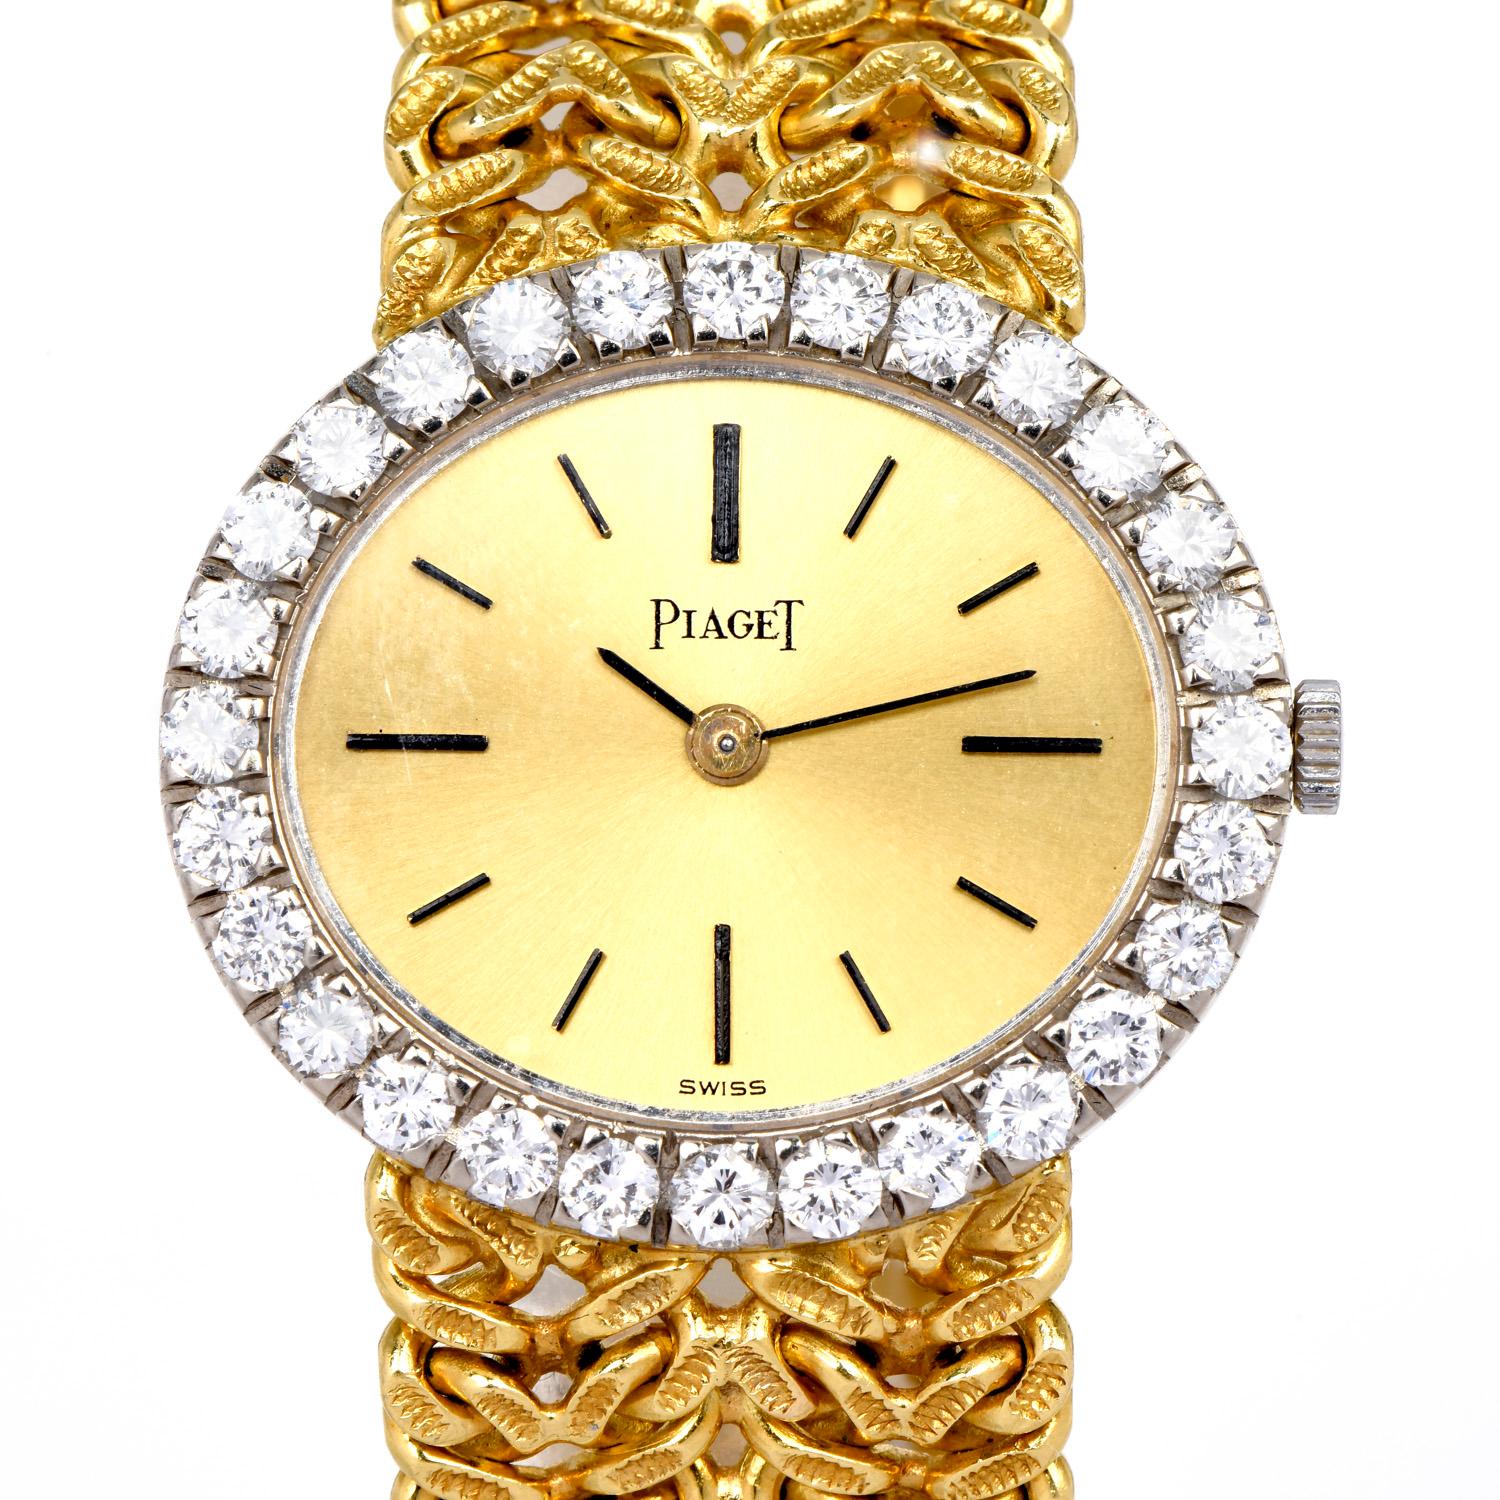 piaget oval watch